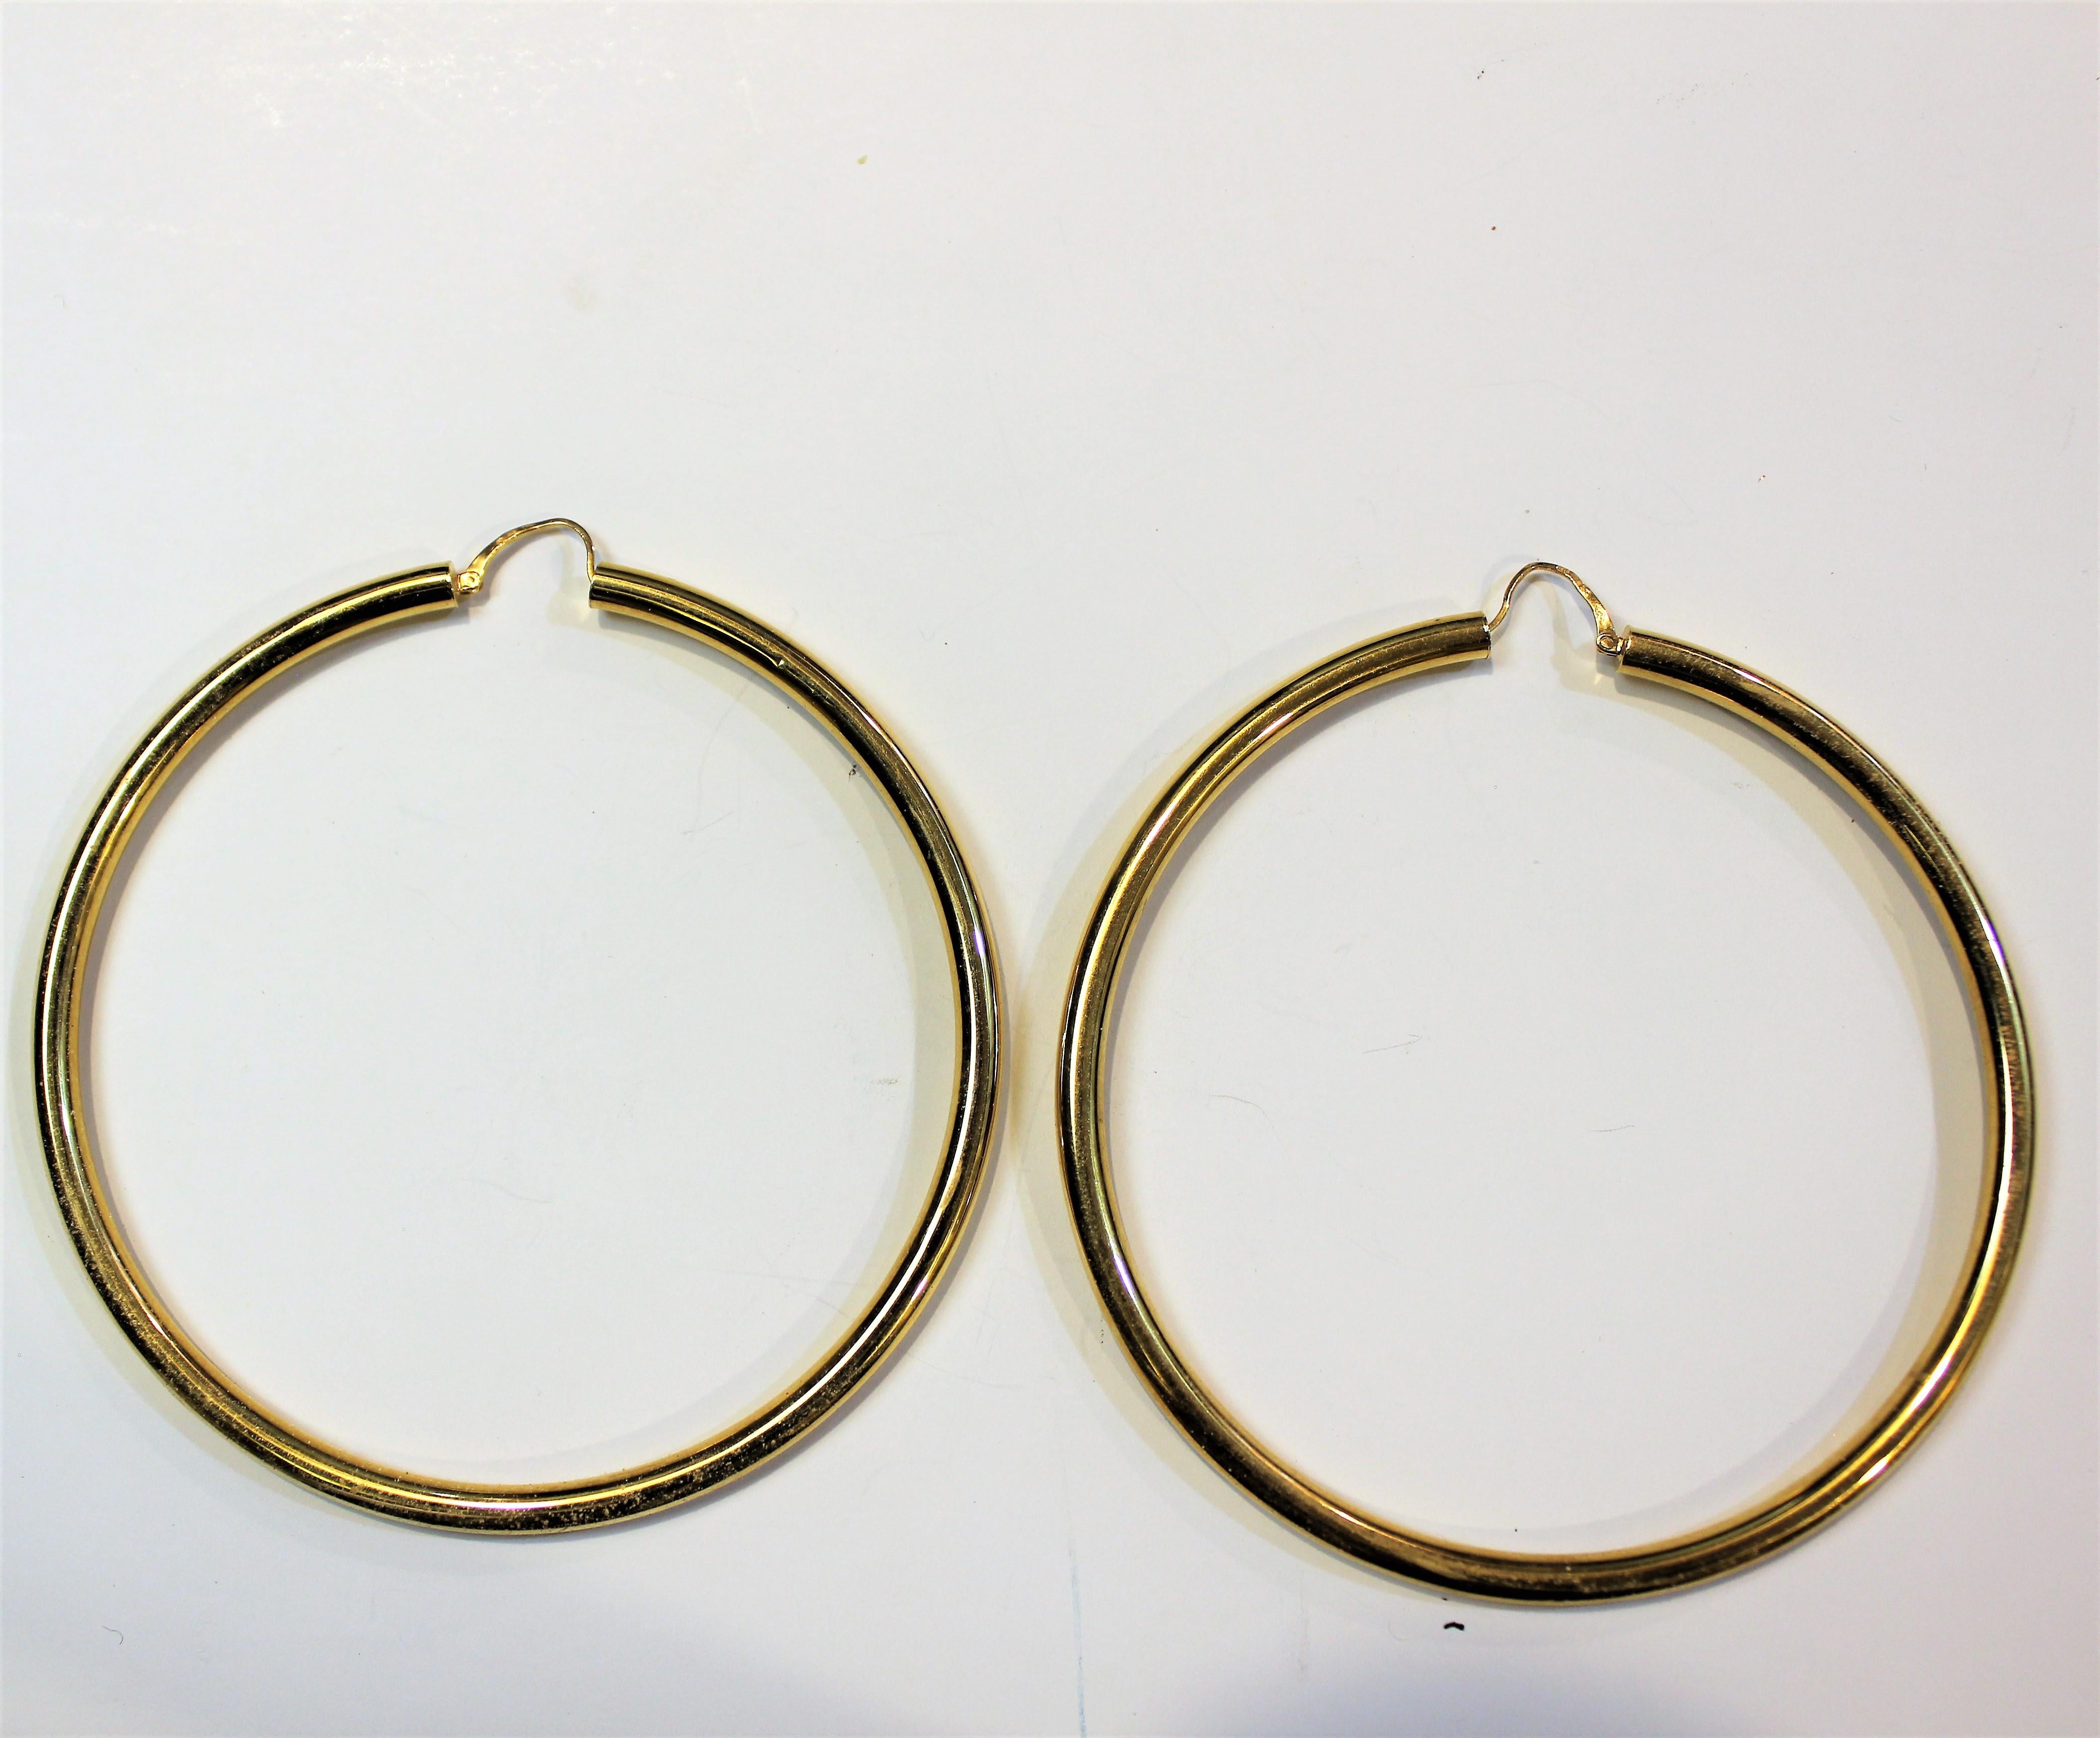 This is one of many Charles Garnier from Paris,  18 karat yellow gold hollow hoop earrings.
This collection is from a close out store with its left over stock still in the safe.
Circa 1980-90's
This designs are extremely detailed with light weight